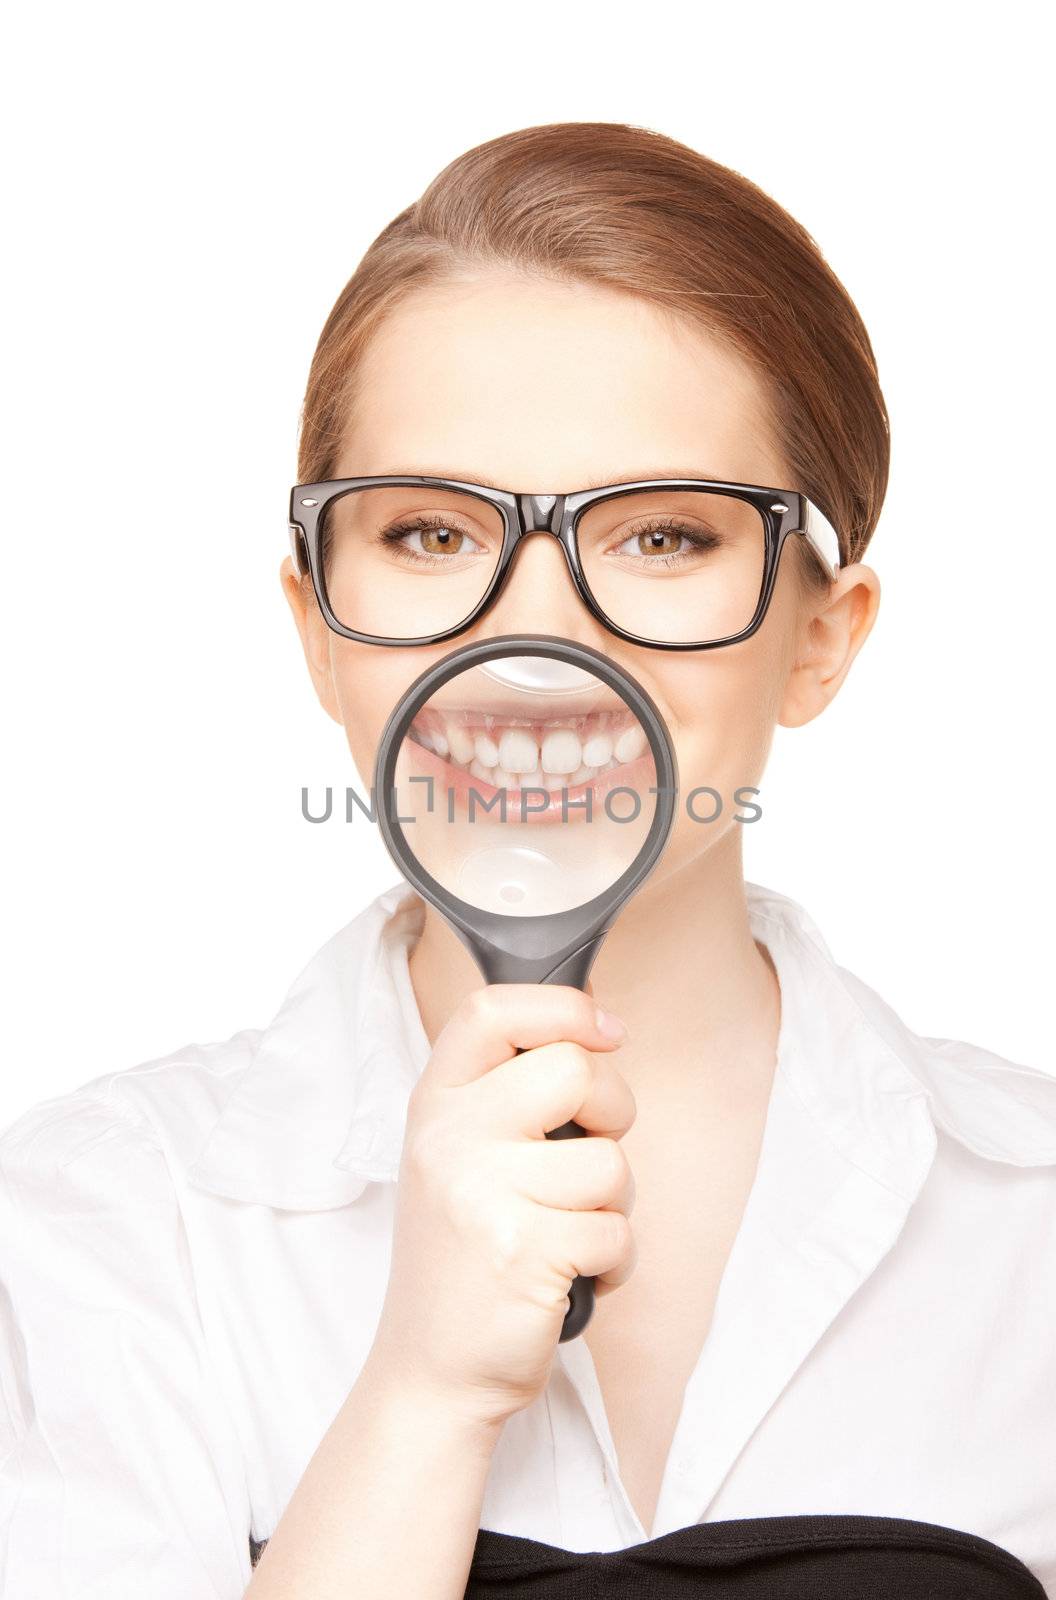 picture of woman with magnifying glass showing teeth